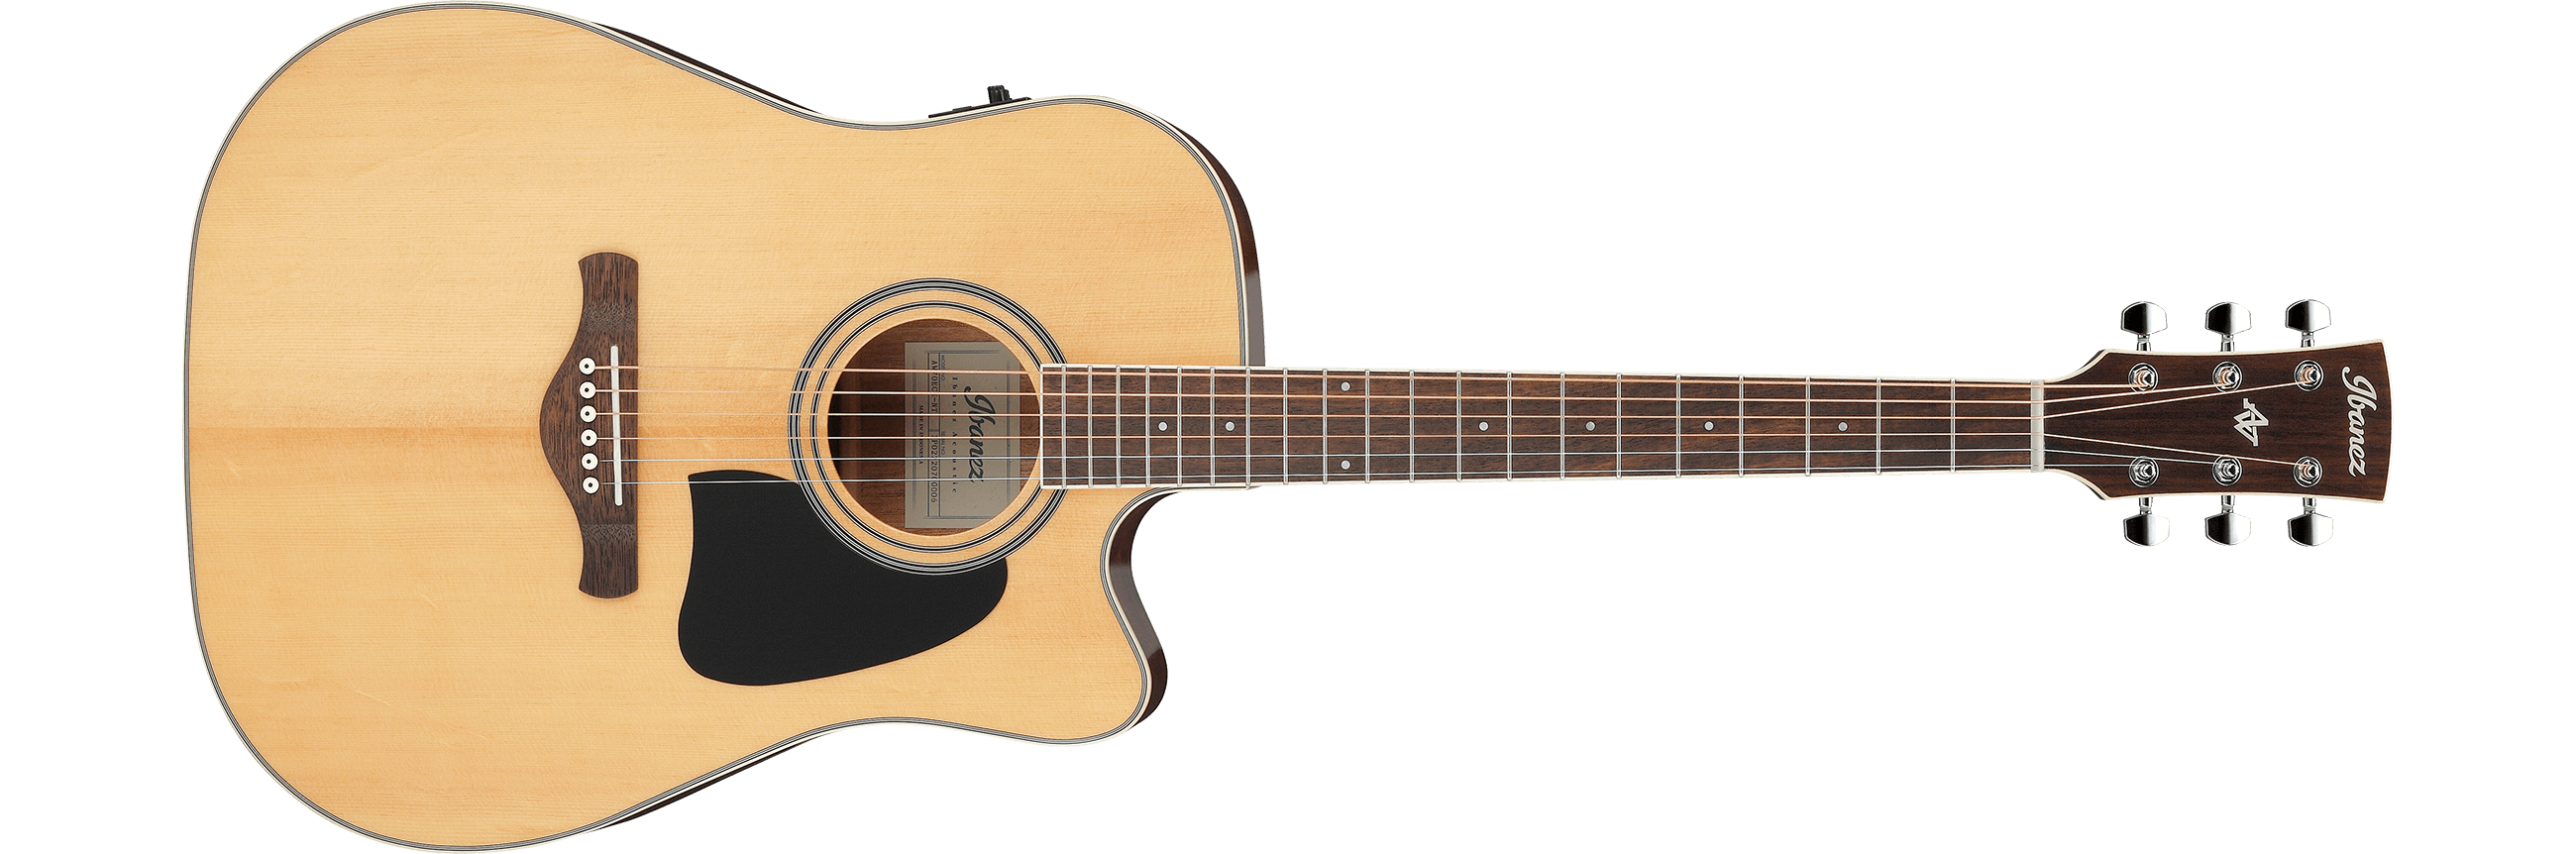 AW70ECE | ARTWOOD | ACOUSTIC GUITARS | PRODUCTS | Ibanez guitars